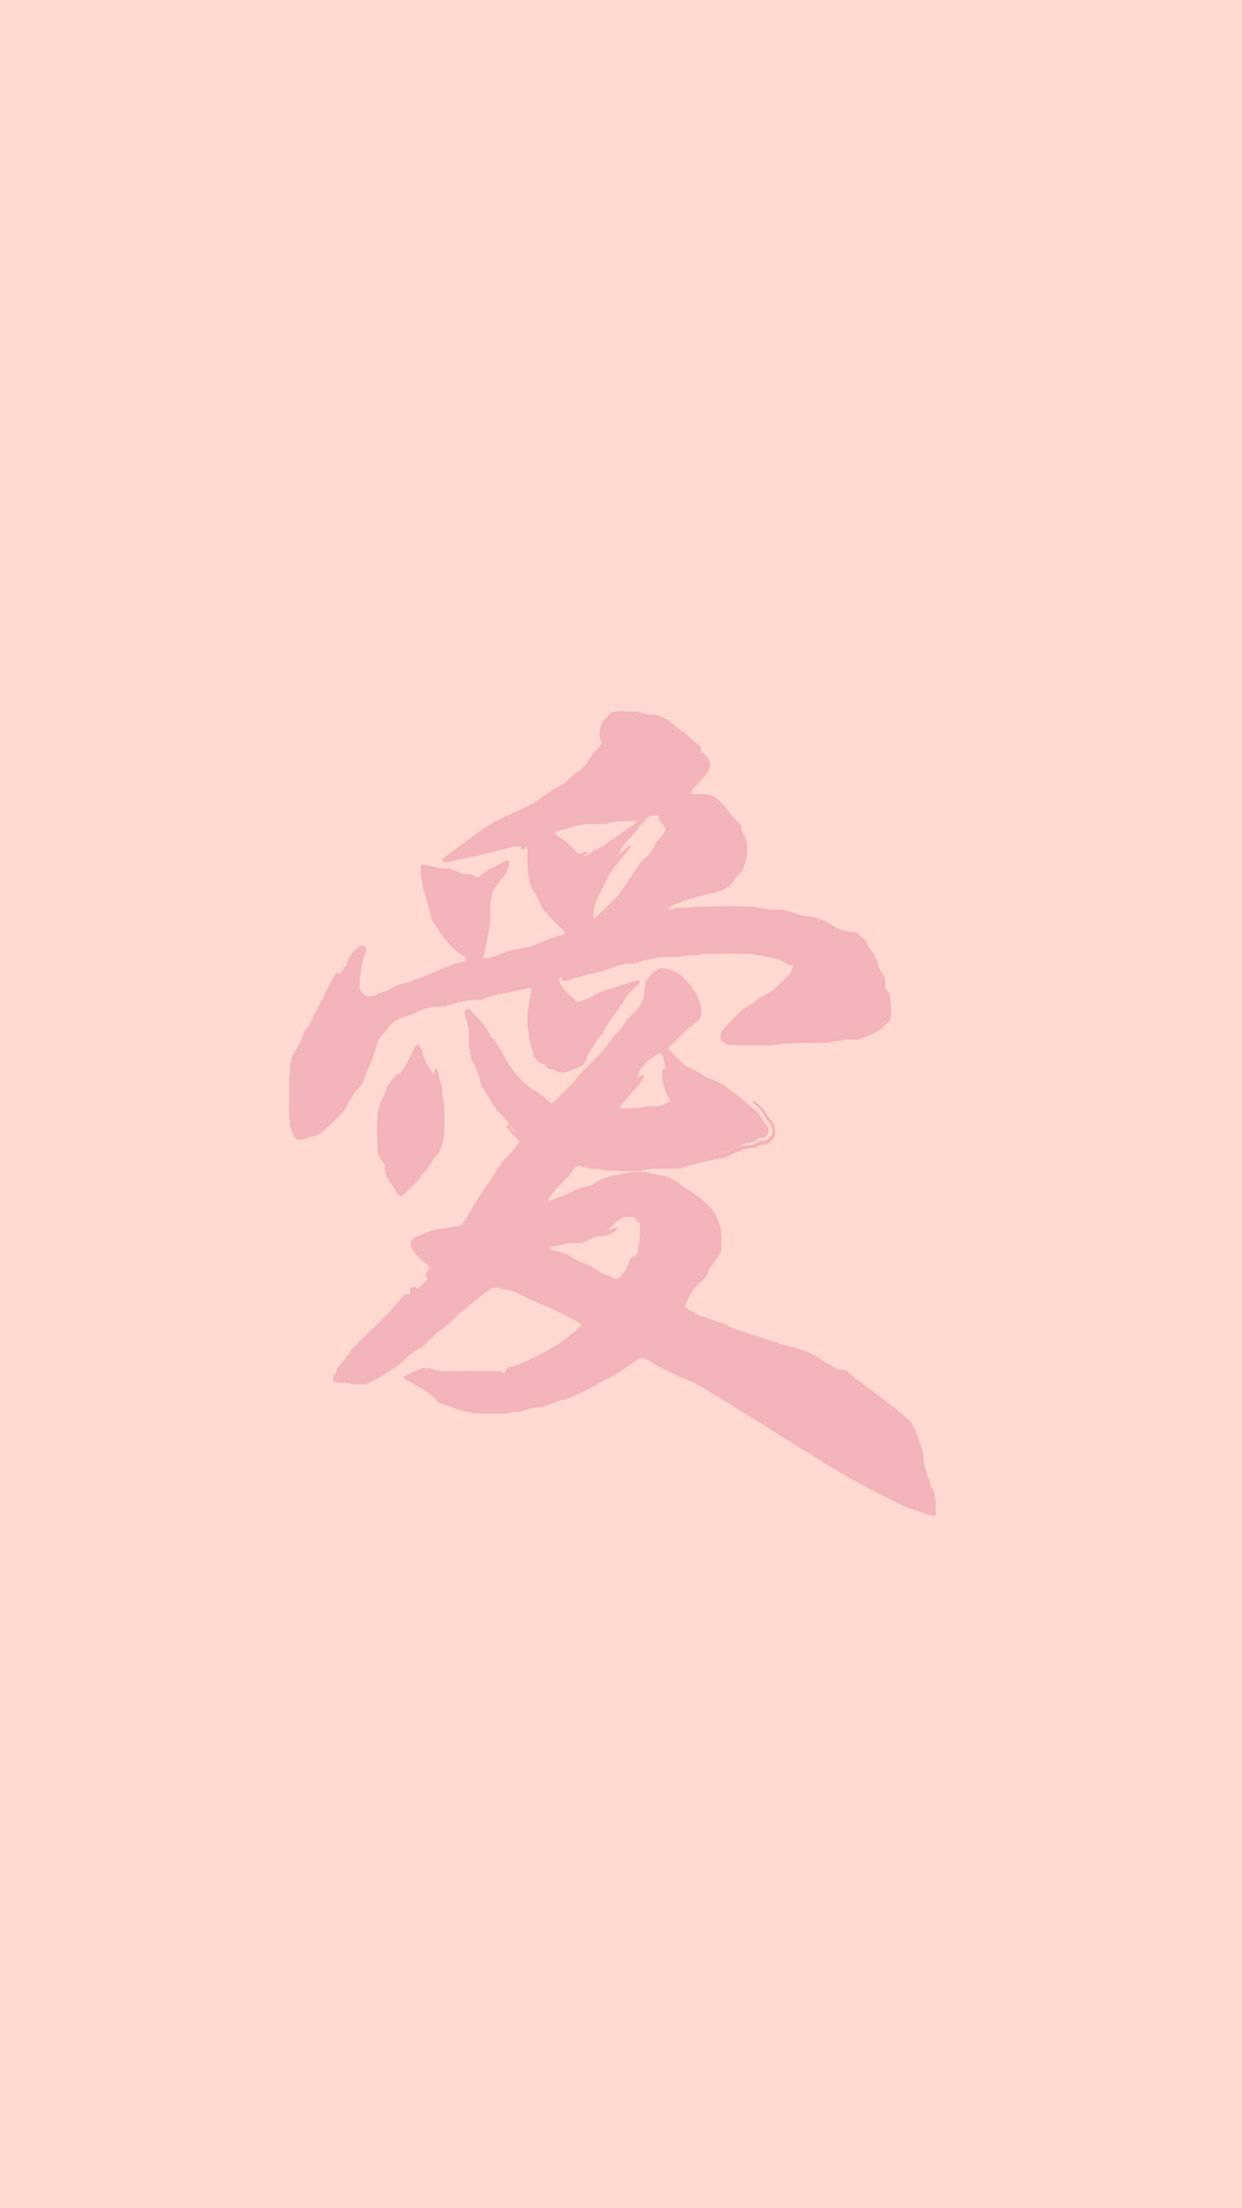  IPhone 6 Hintergrundbild 1242x2208. iPhone6papers.co. iPhone 6 wallpaper. love chinese letter minimal pink red